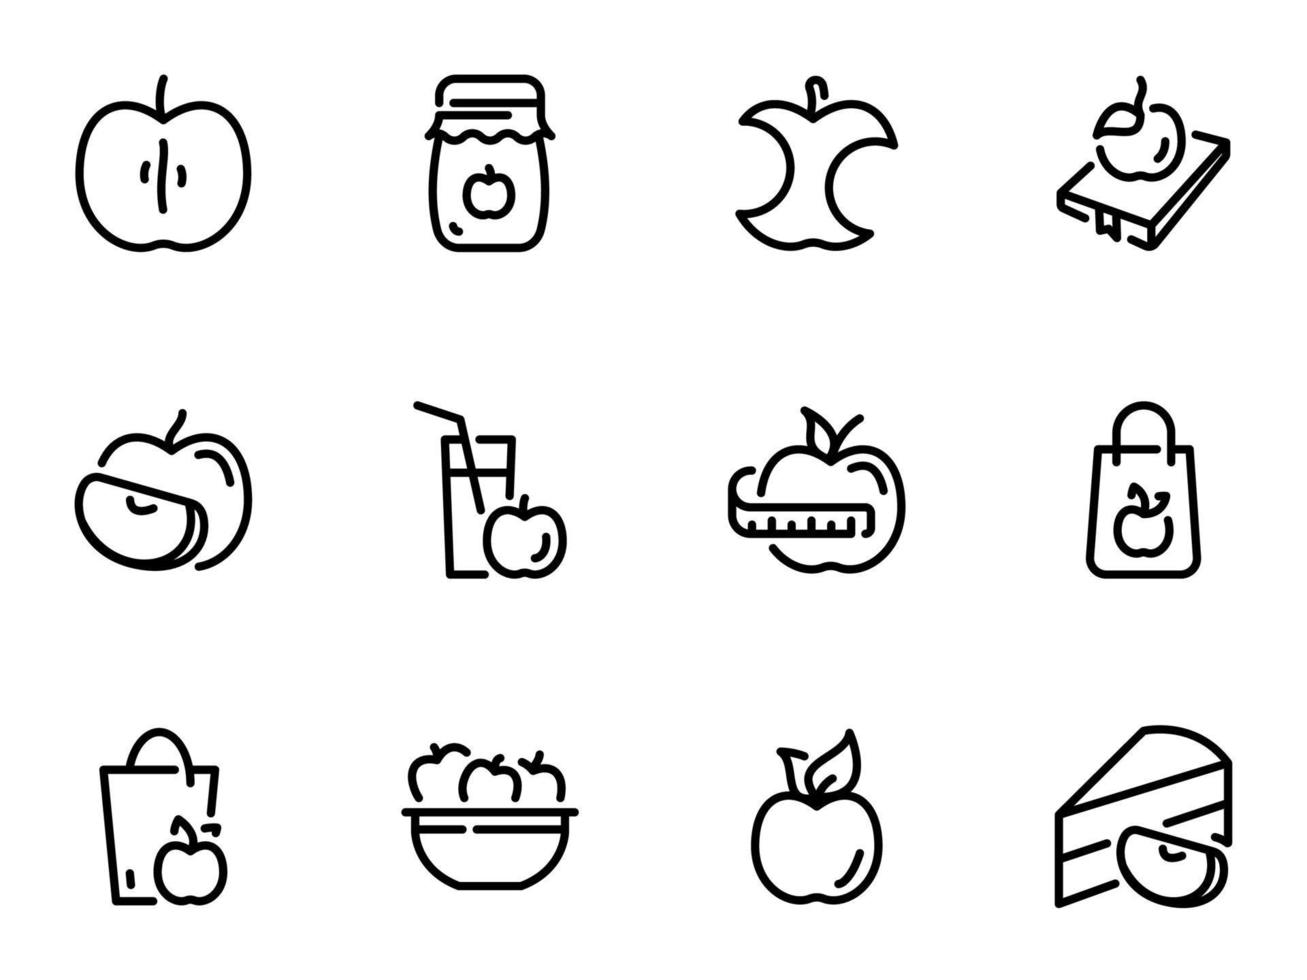 Set of black vector icons, isolated against white background. Illustration on a theme Apples